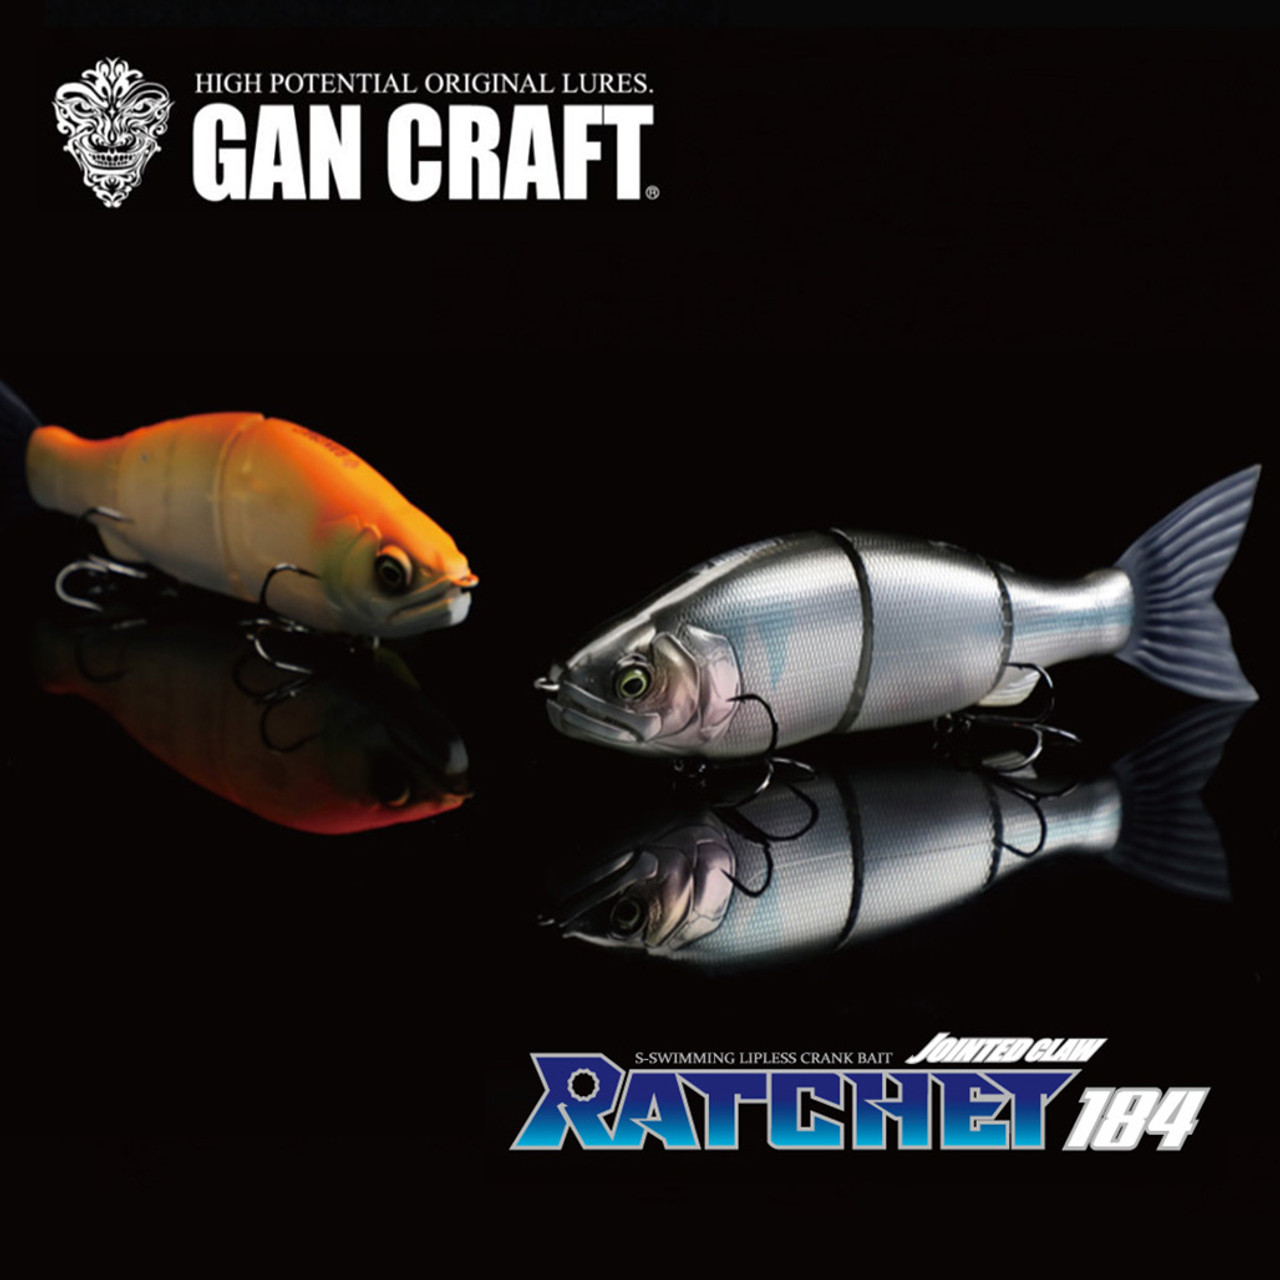 Gan Craft JOINTED CLAW RATCHET 184 F NEW